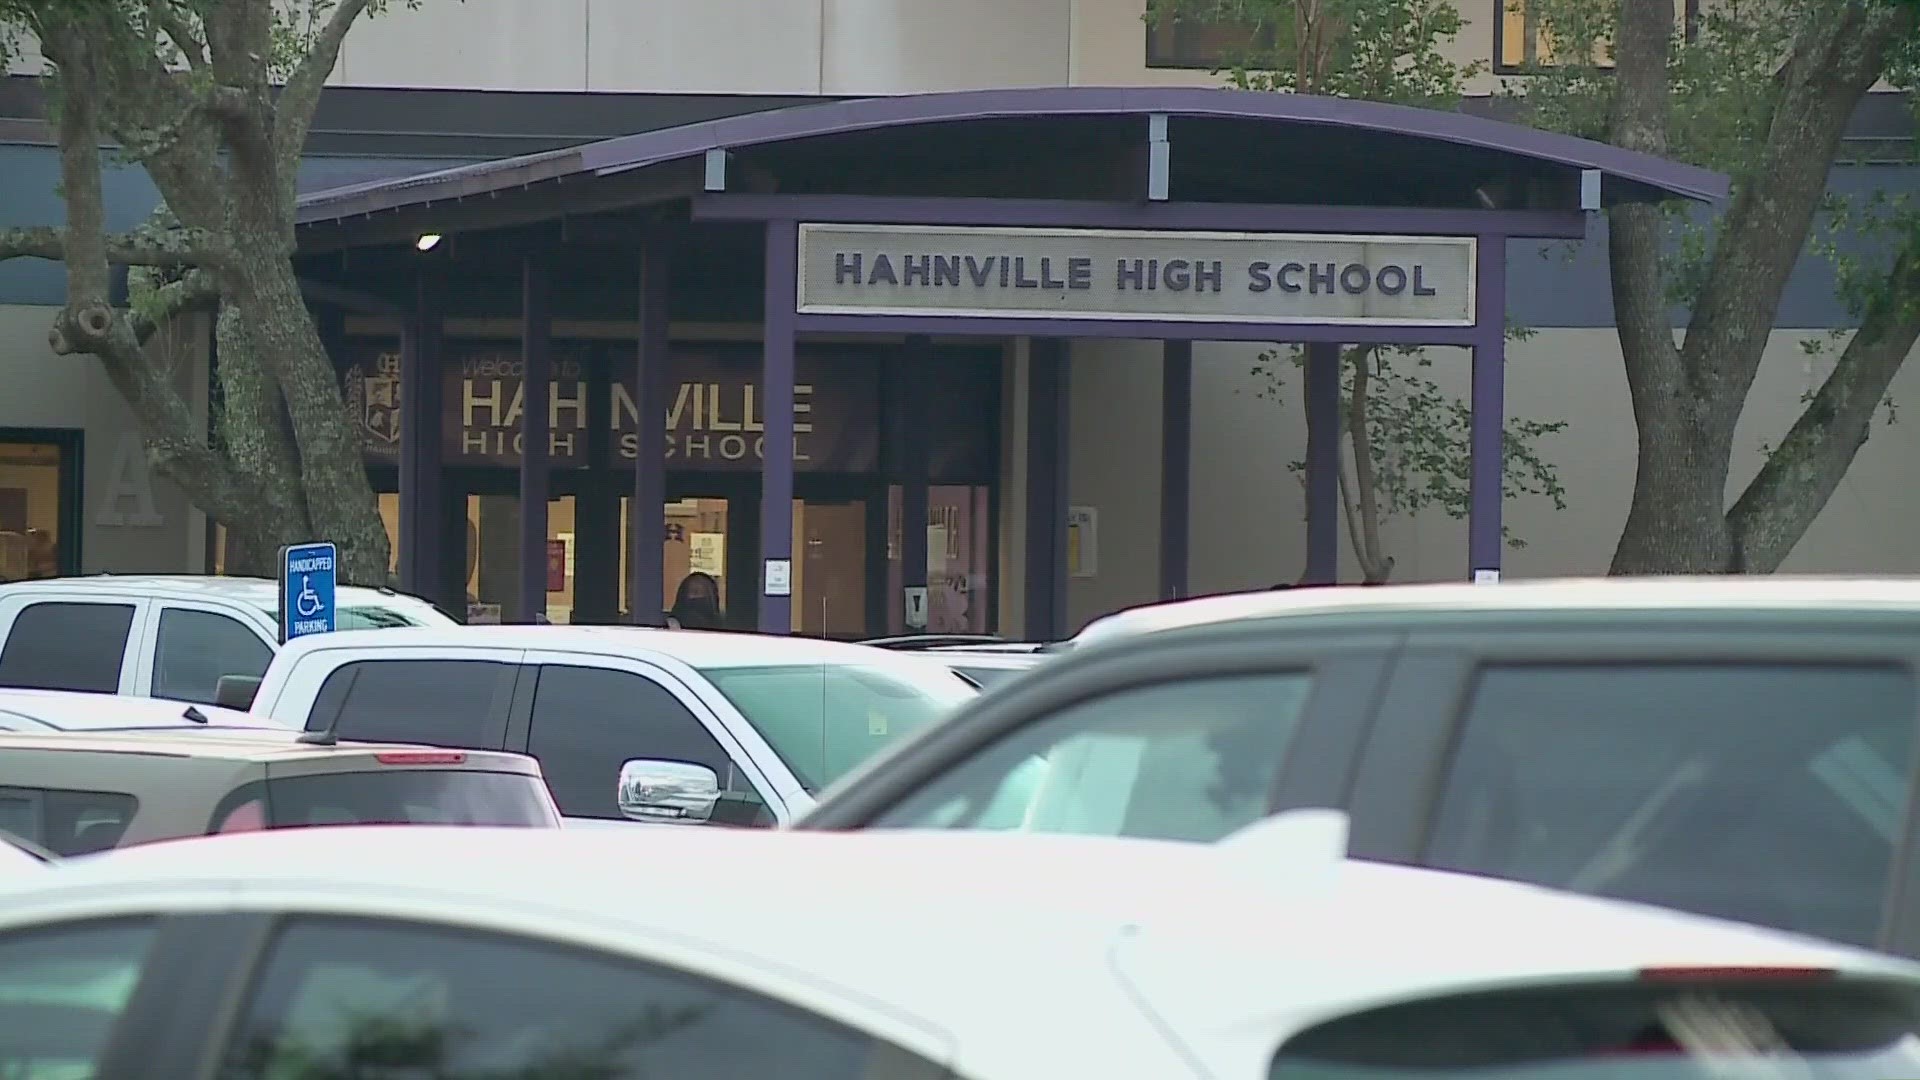 28-year-old woman posed as teen, attended hahnville high this past school  year, sheriff says | wwltv. Com